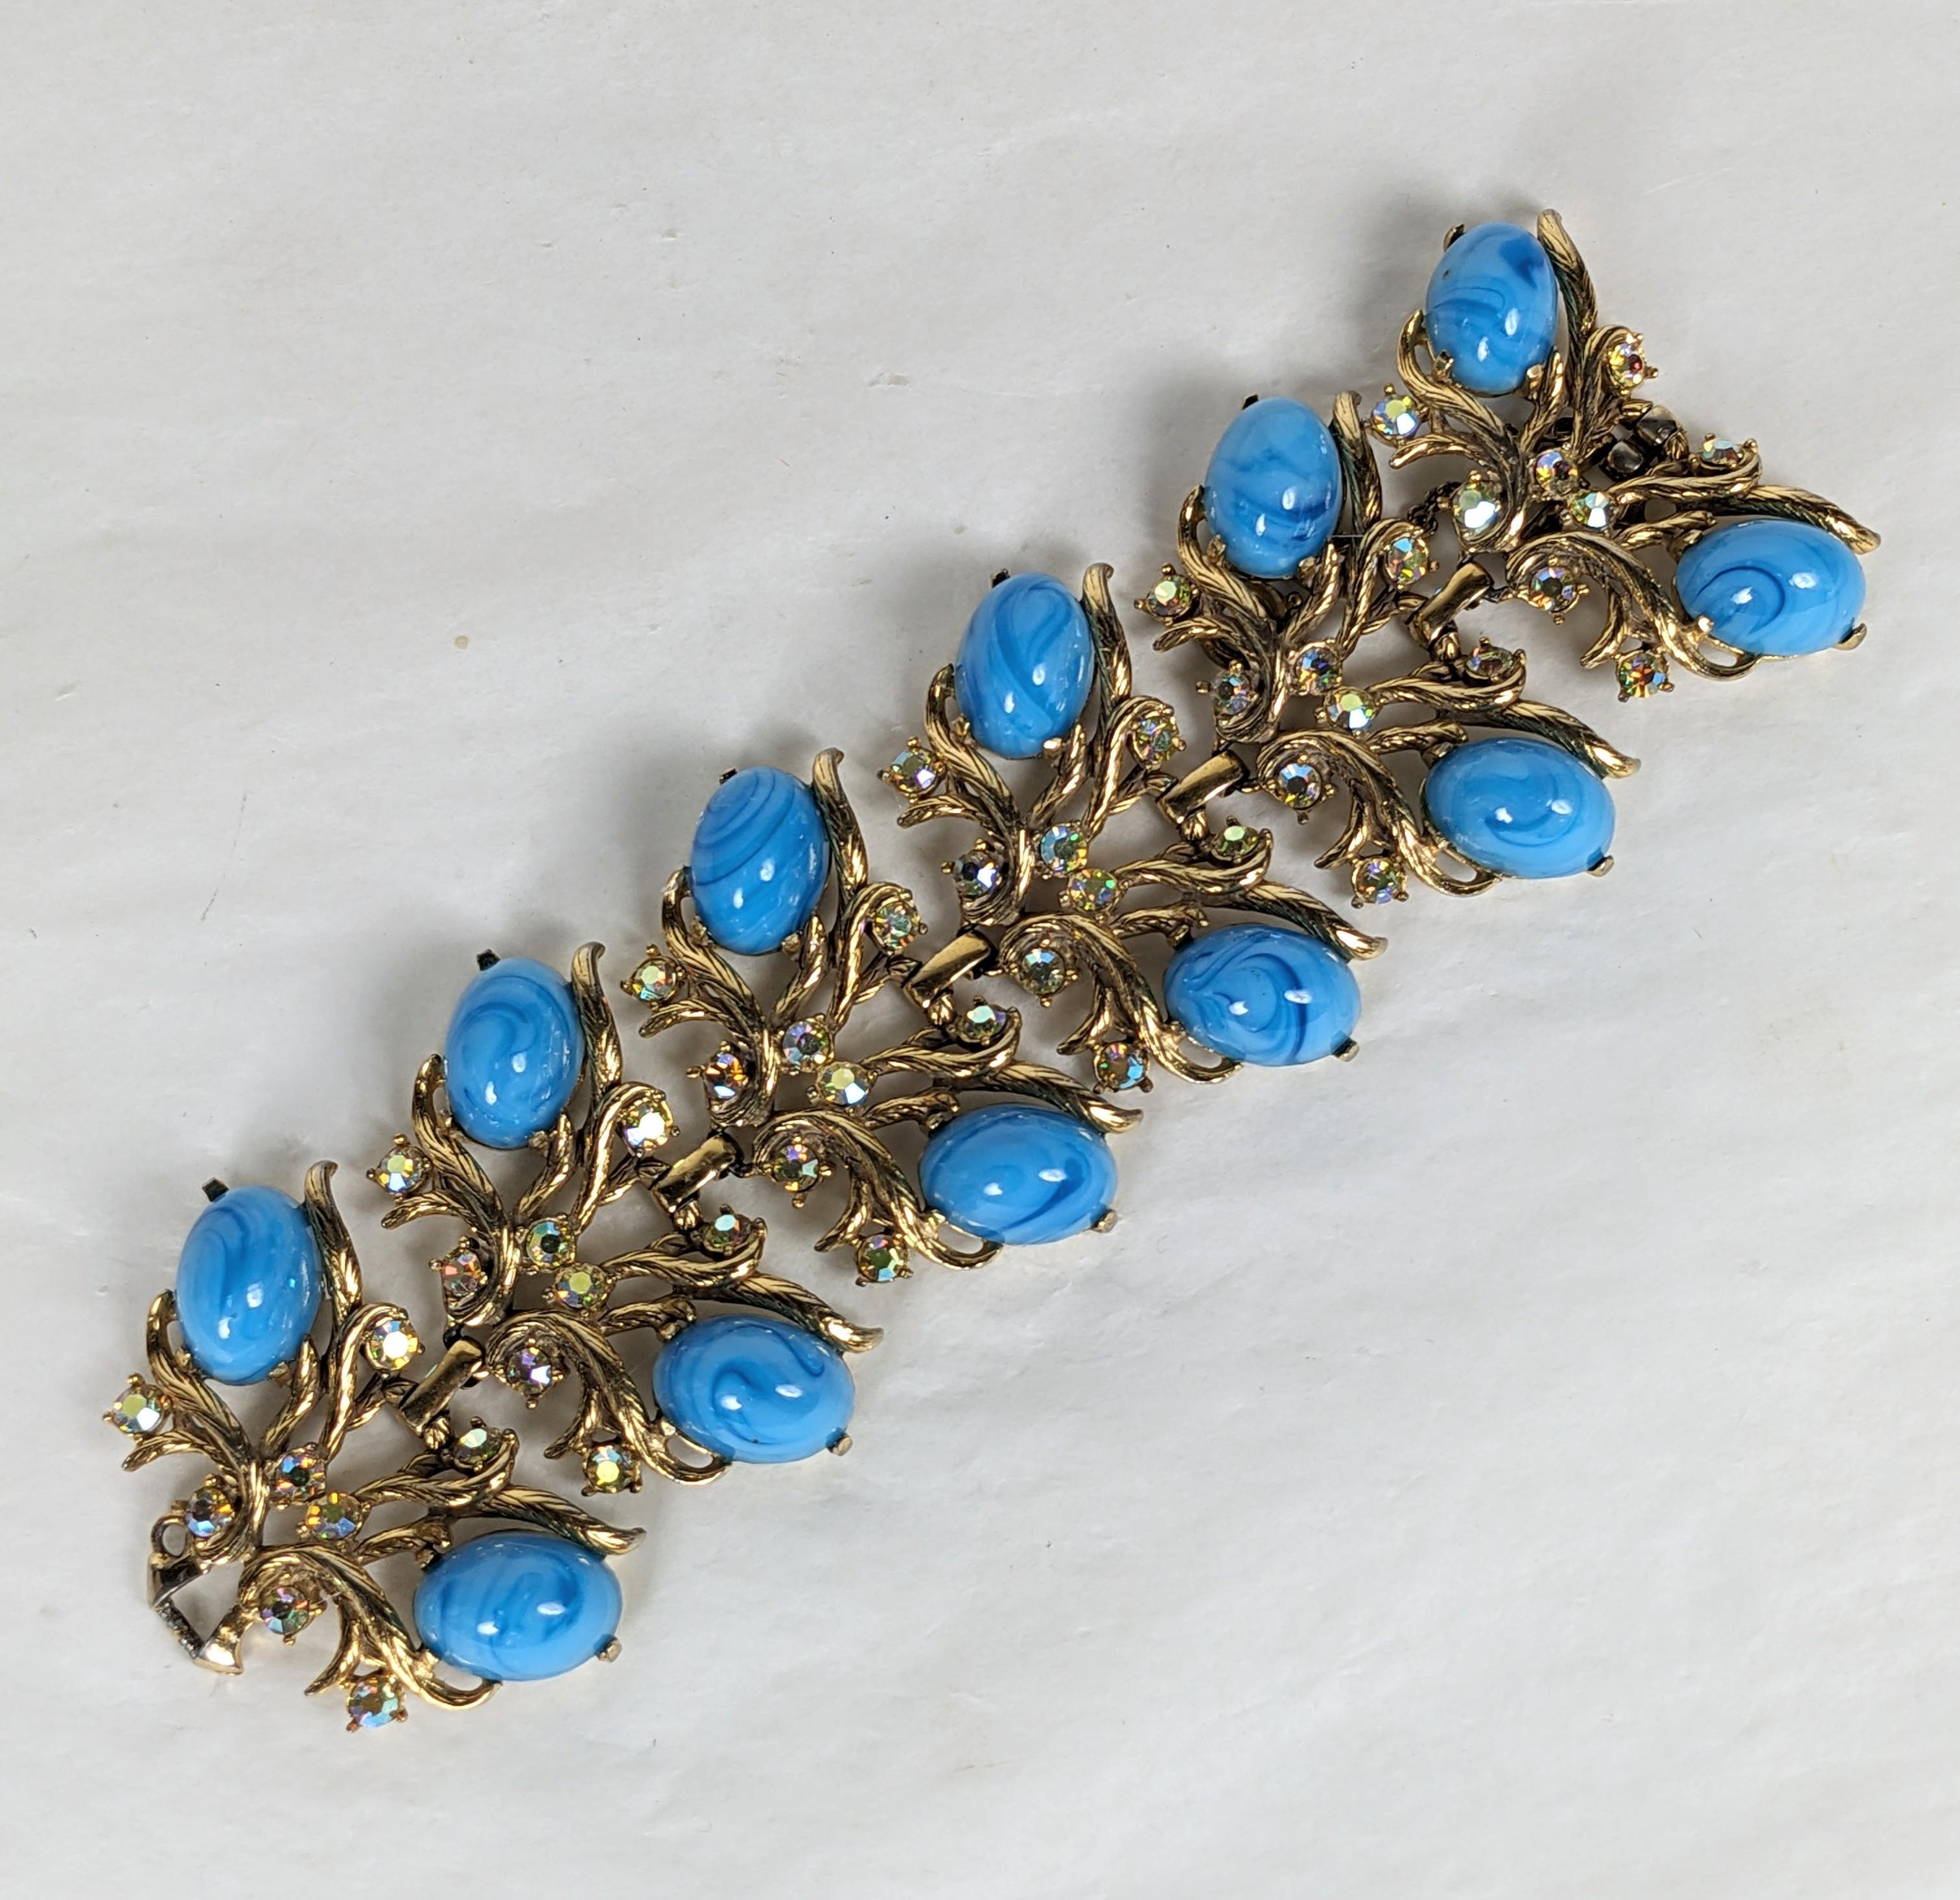 Elsa Schiaparelli Baroque revival wide bracelet composed of leafy vine motif  textured gilt plate base metal with faux Tibetan turquoise oval cabochons and iridized Aurora pink/blue/gold faceted  rhinestones.
Excellent Condition, Signed. L 7.50